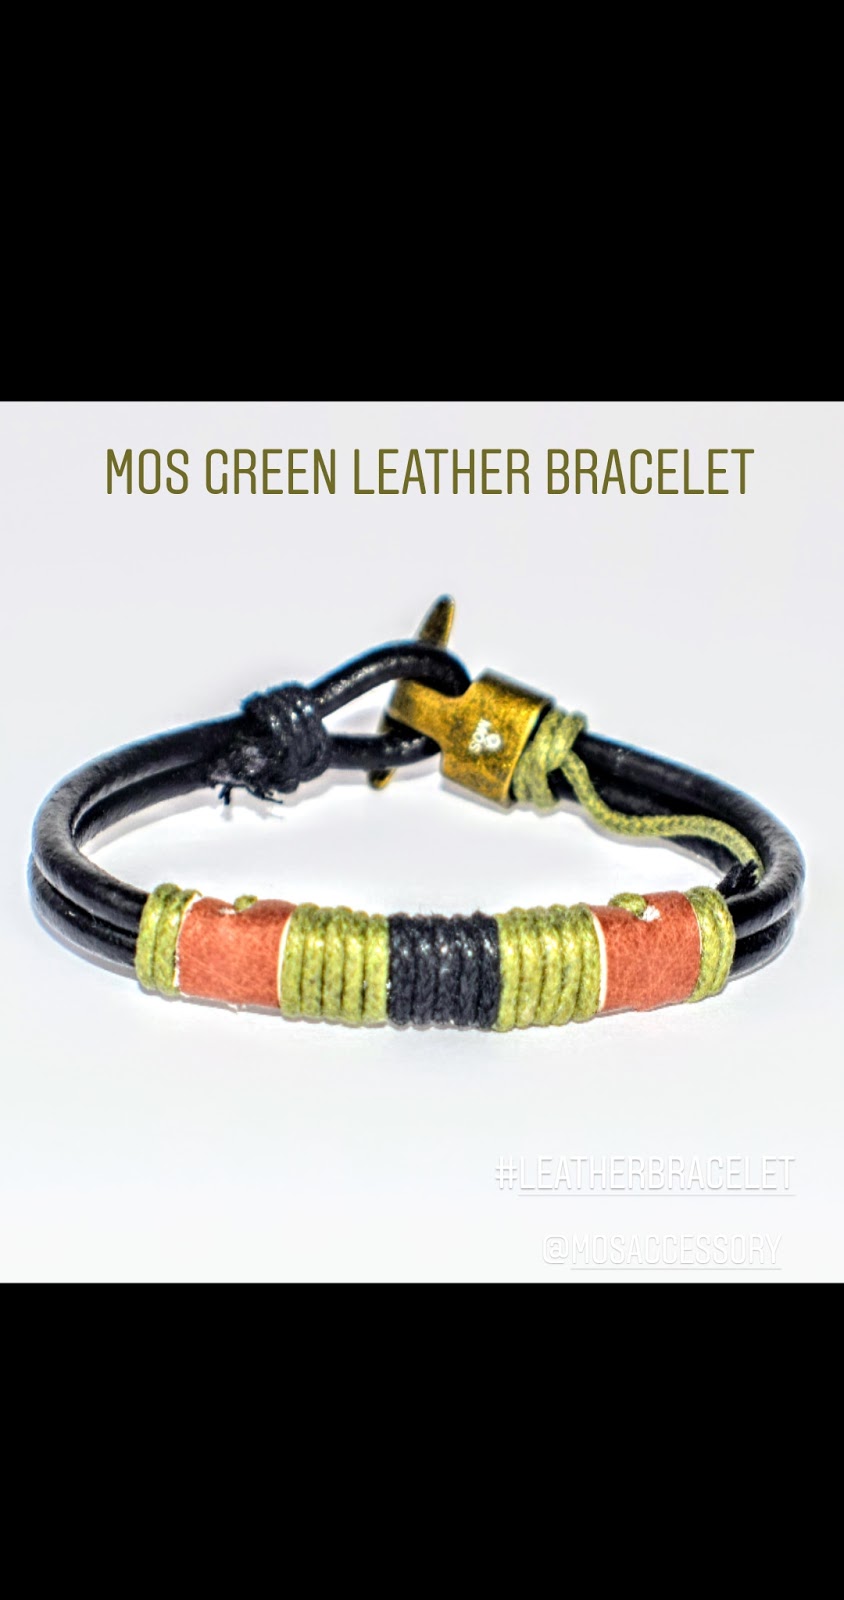 MOS ACCESSORIES OFFICIAL | 805 NW 2nd Ave apt 1, Fort Lauderdale, FL 33311 | Phone: (954) 908-9217